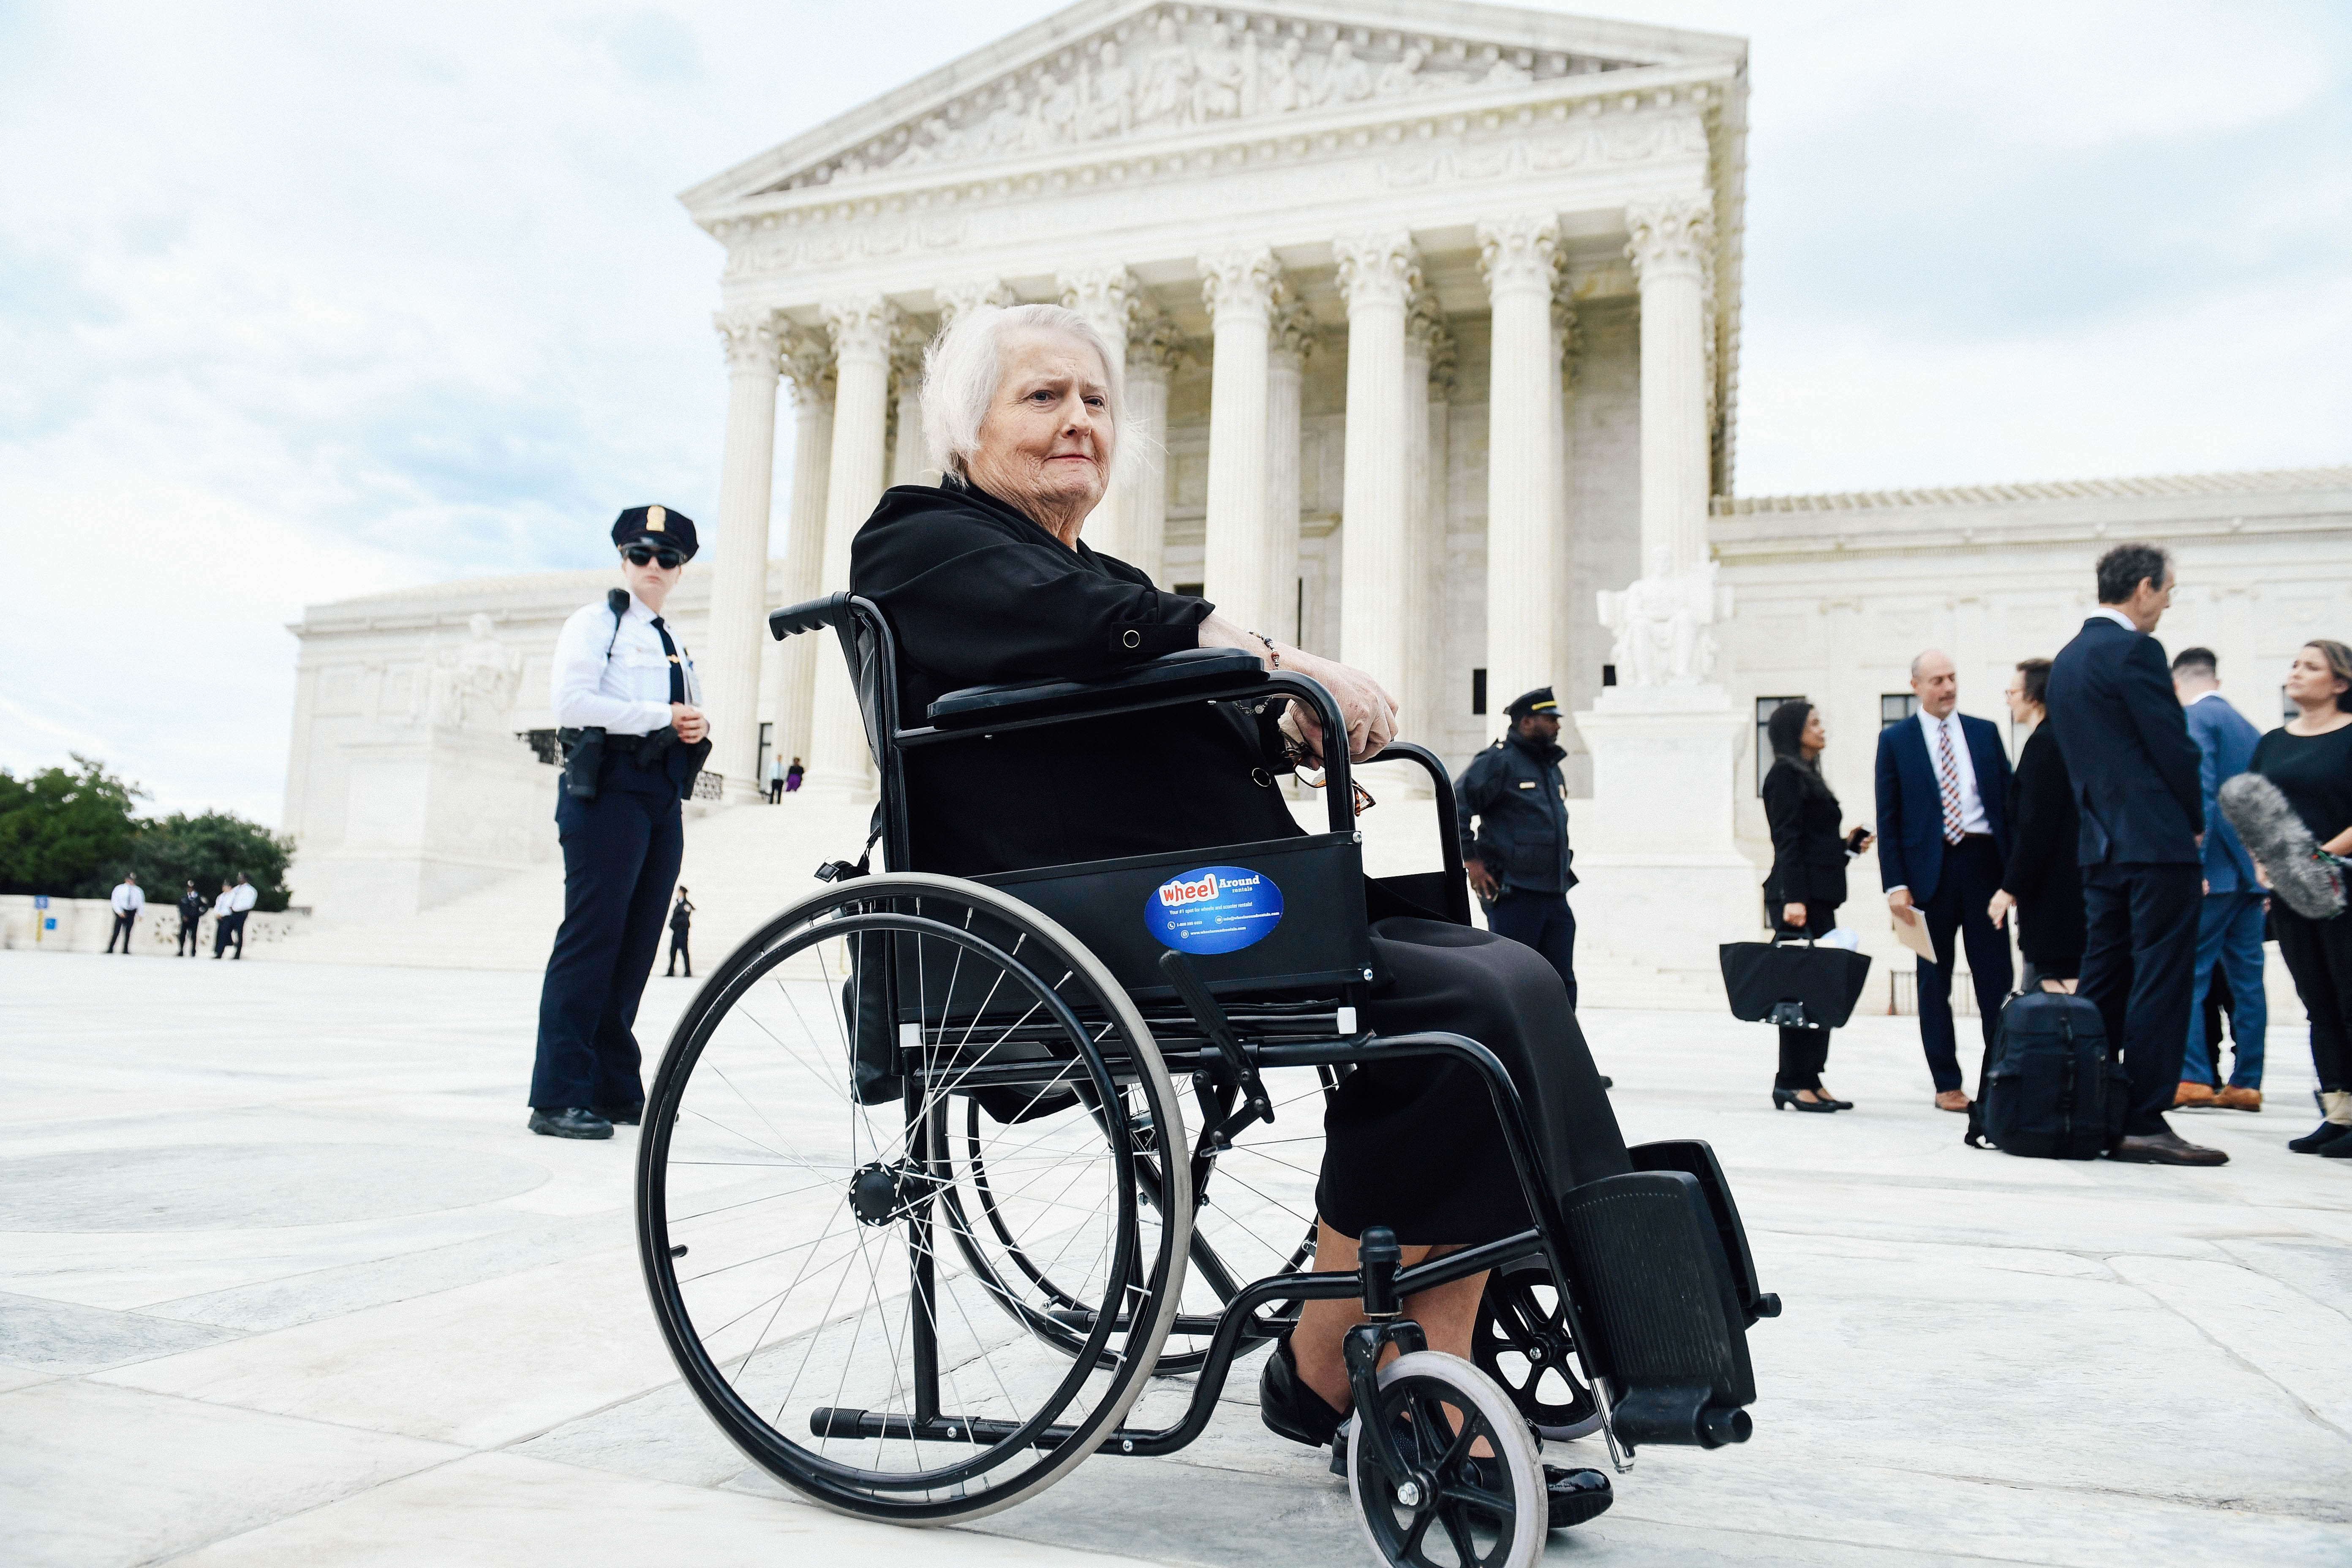 Aimee Stephens sitting in a wheelchair outside the Supreme Court building.